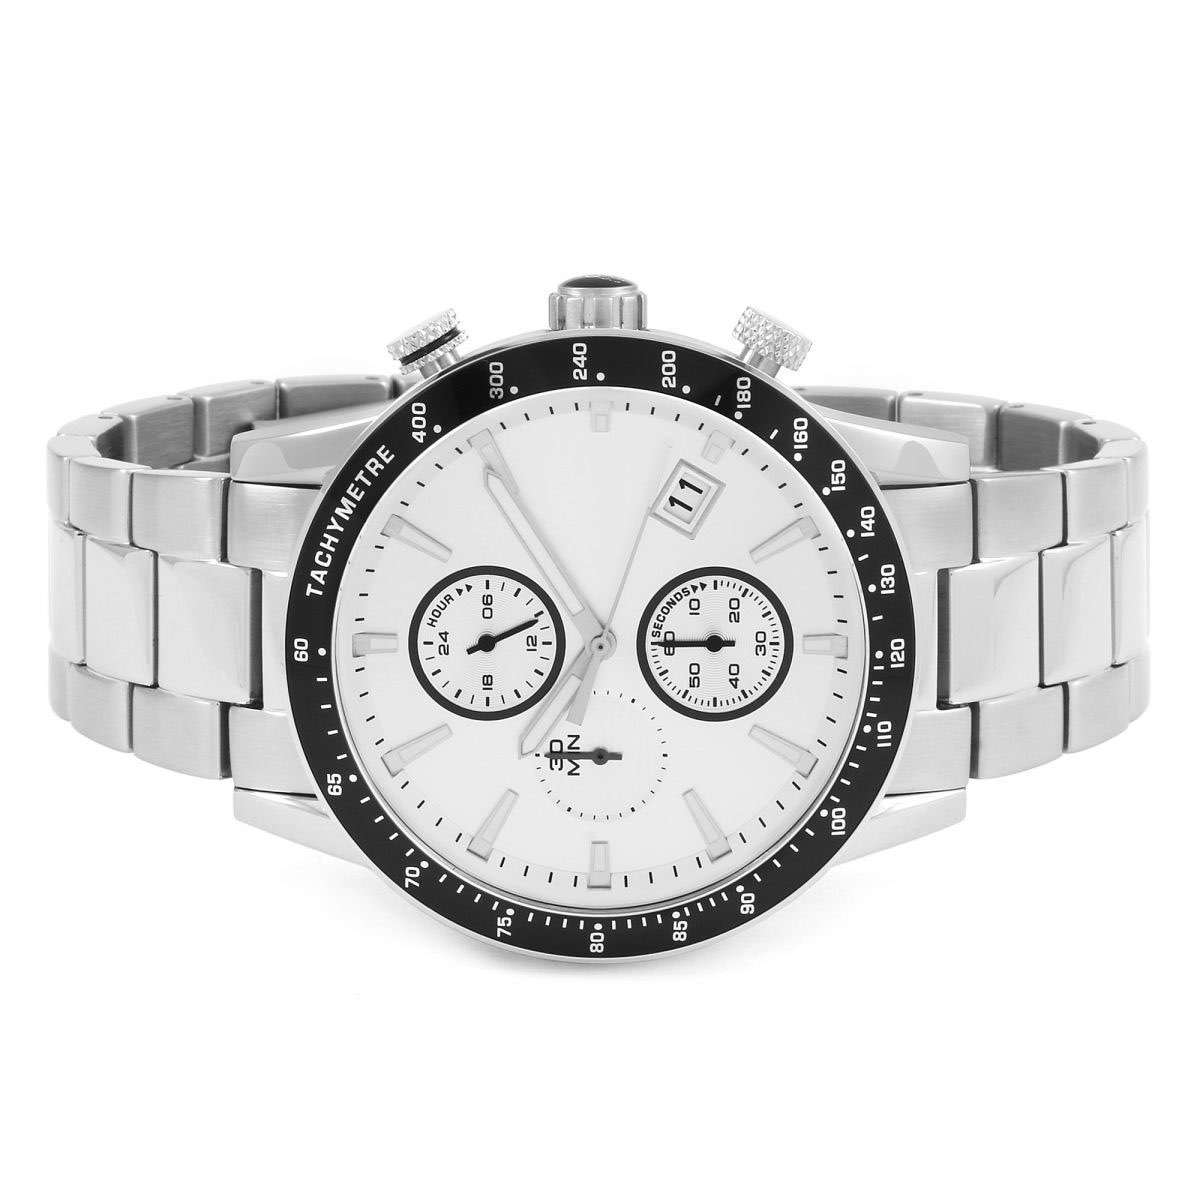 Chronograph Watch Men CM-8023 Customize Watch Top One Watch Manufacturer of Chronograph China